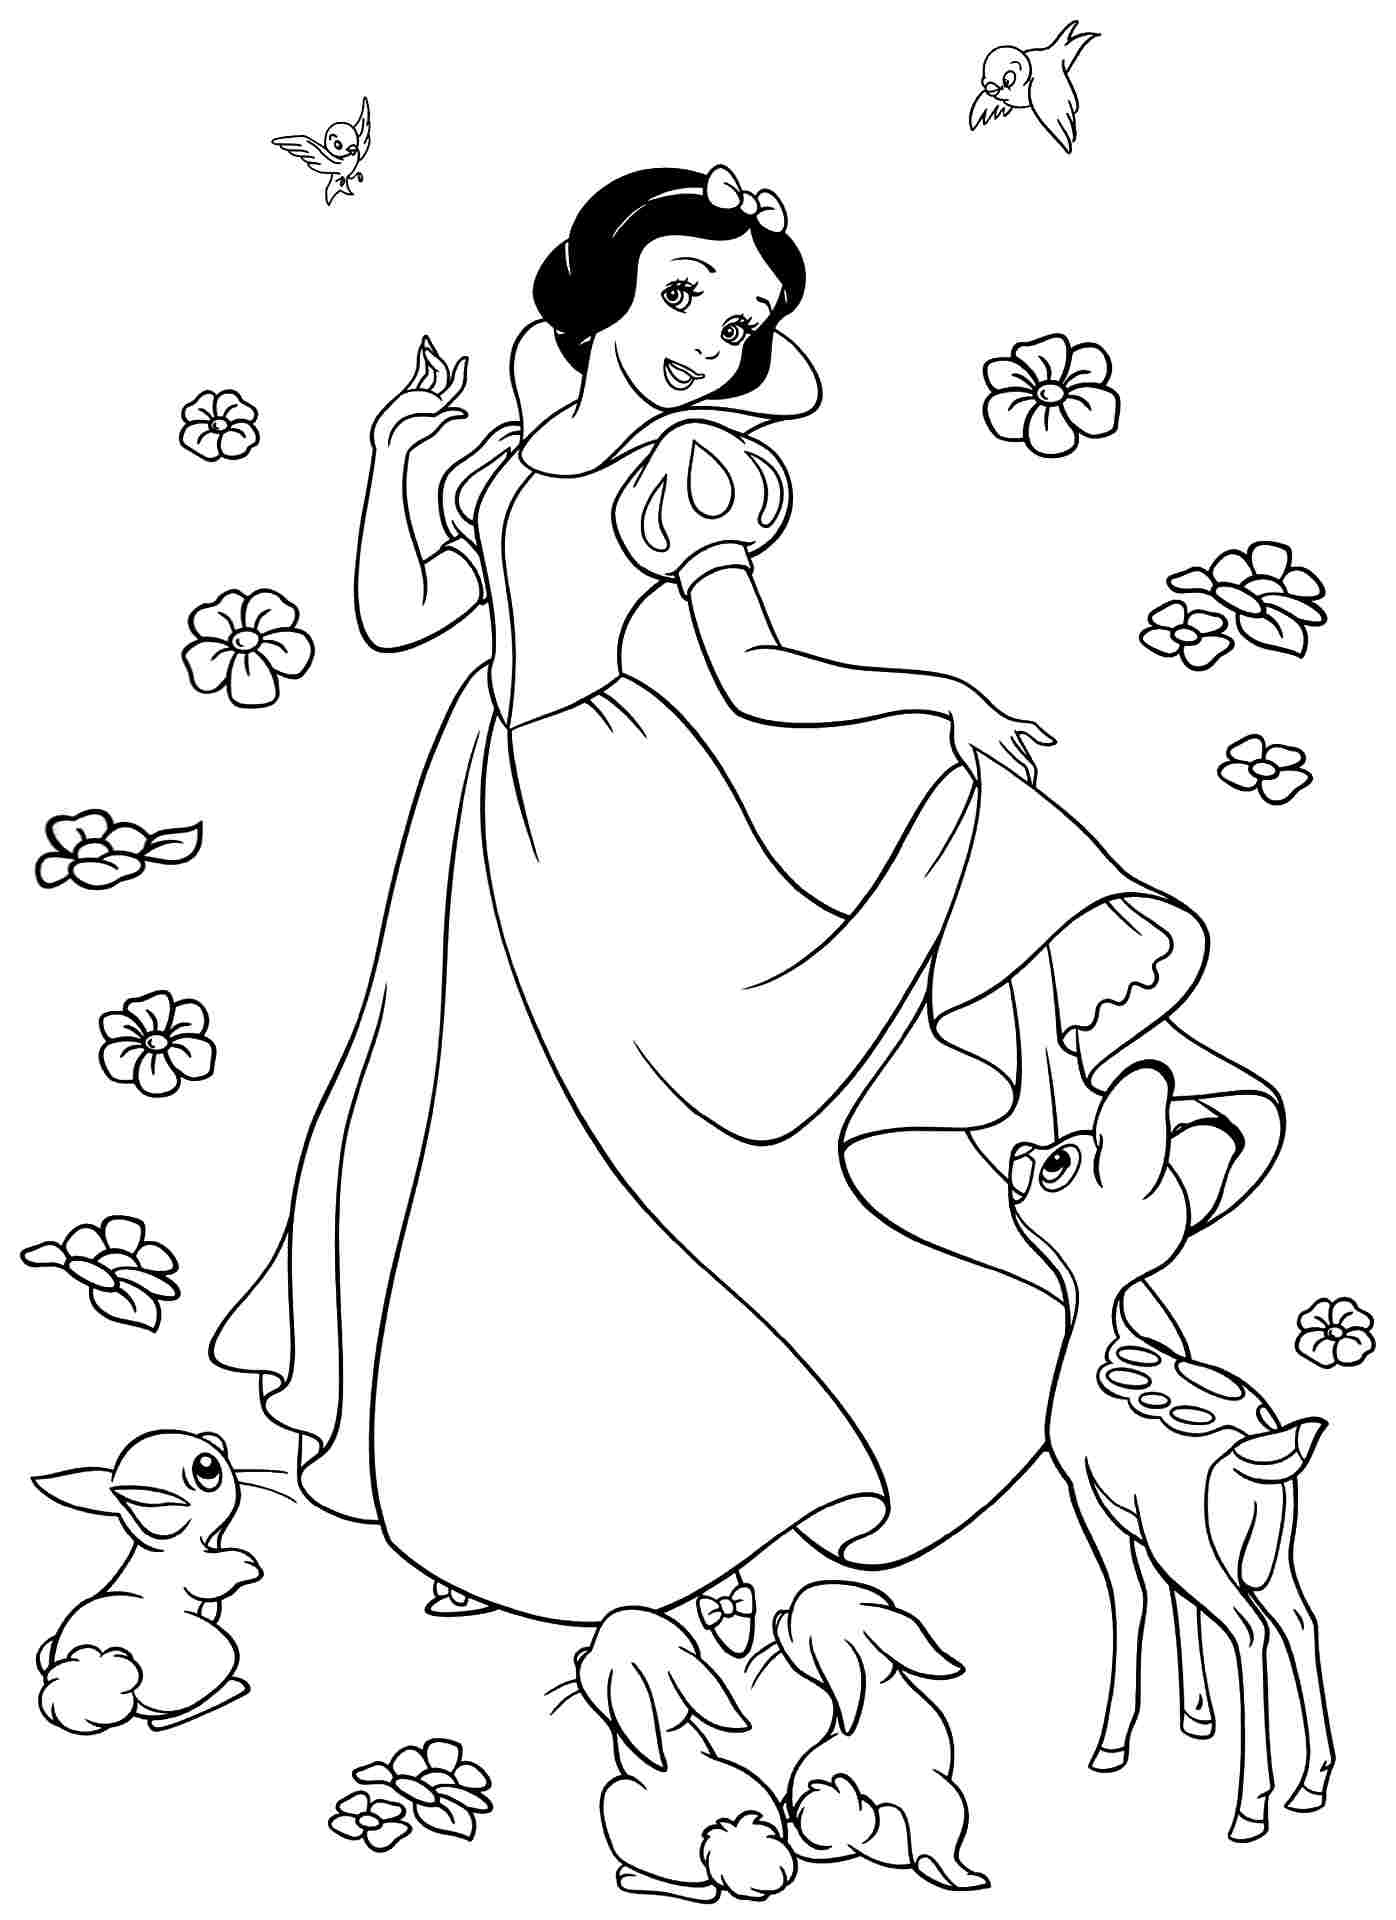 pic of 3 princess snow white colouring pages - VoteForVerde.com